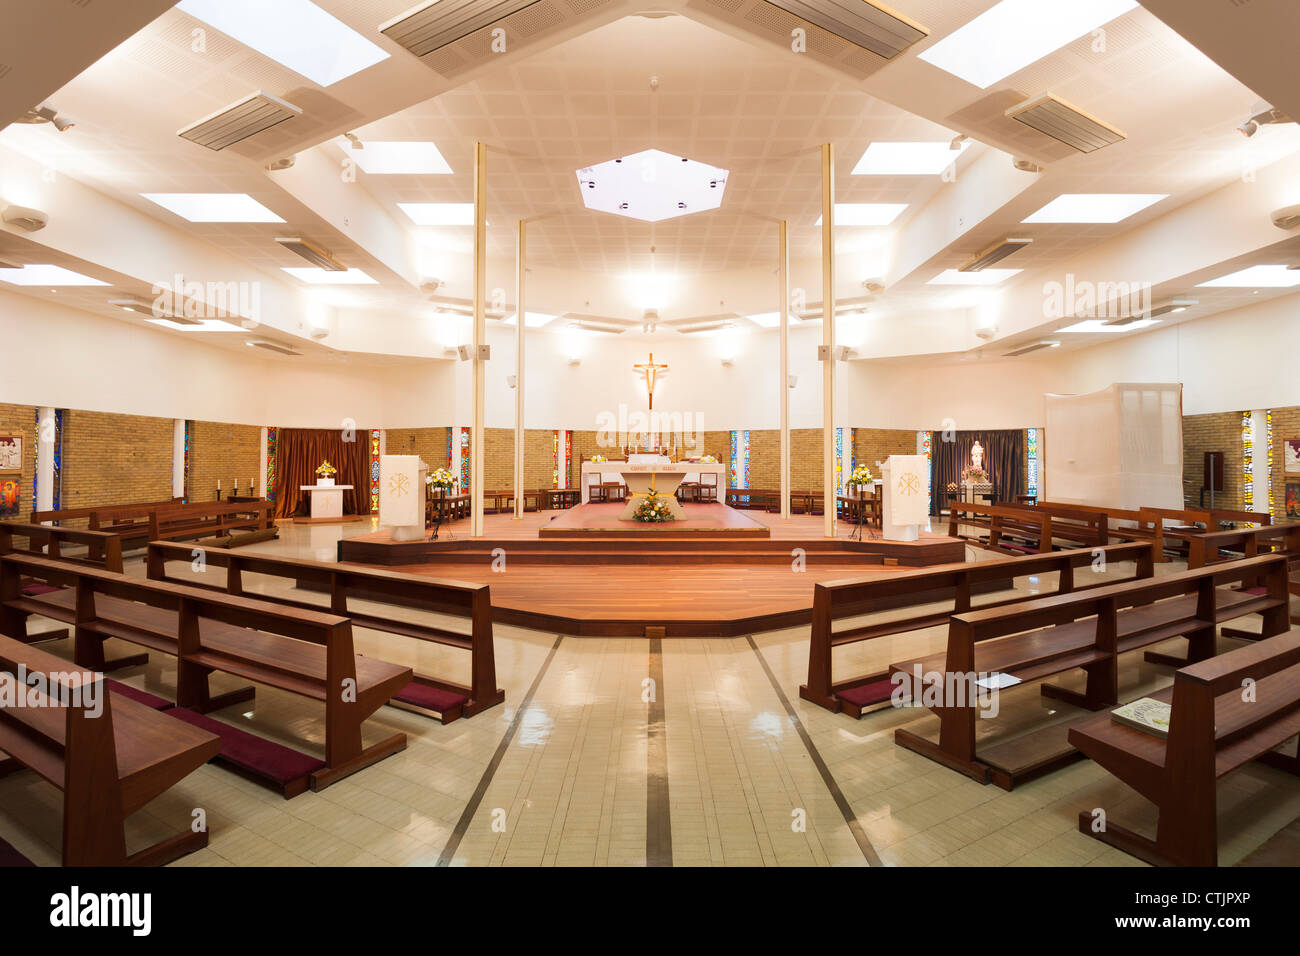 interior of modern catholic church with pews and altar St Mary's Church in Alton Stock Photo